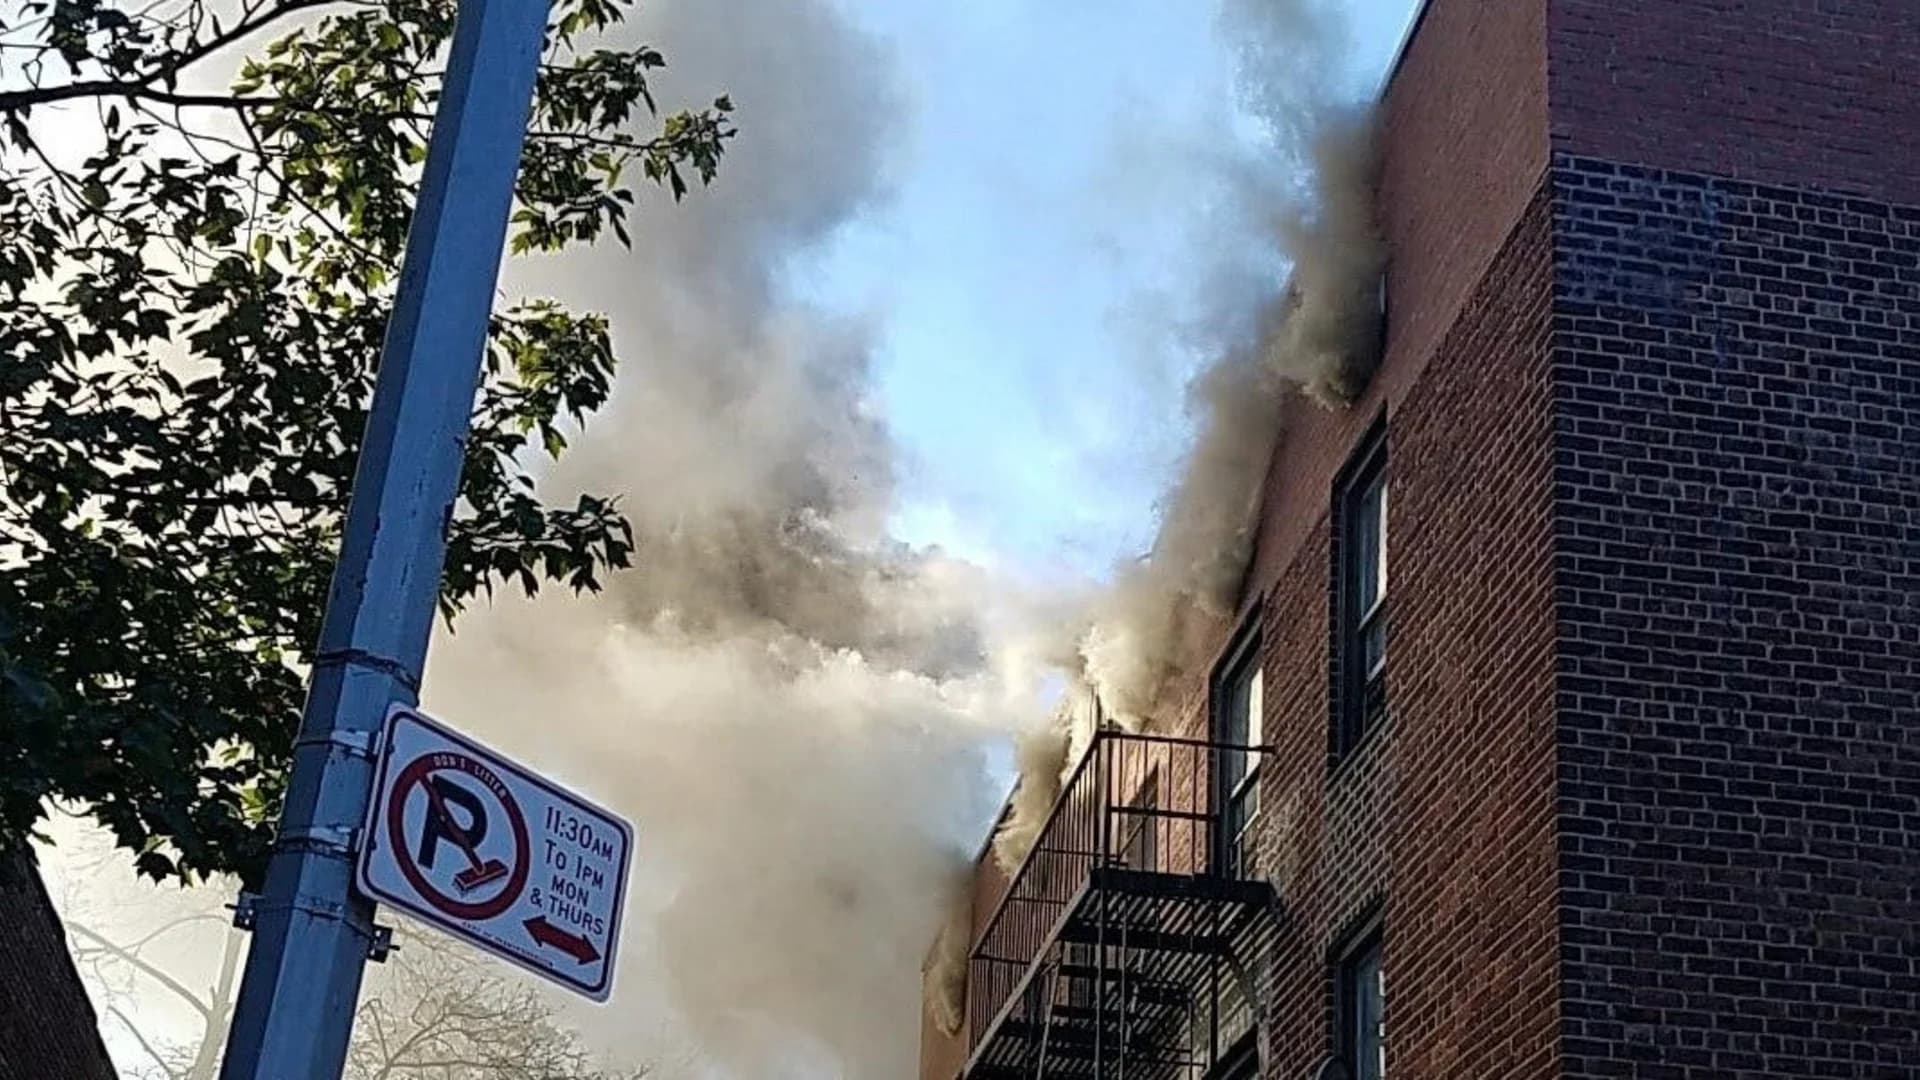 Photos: Fire breaks out at Bronx building